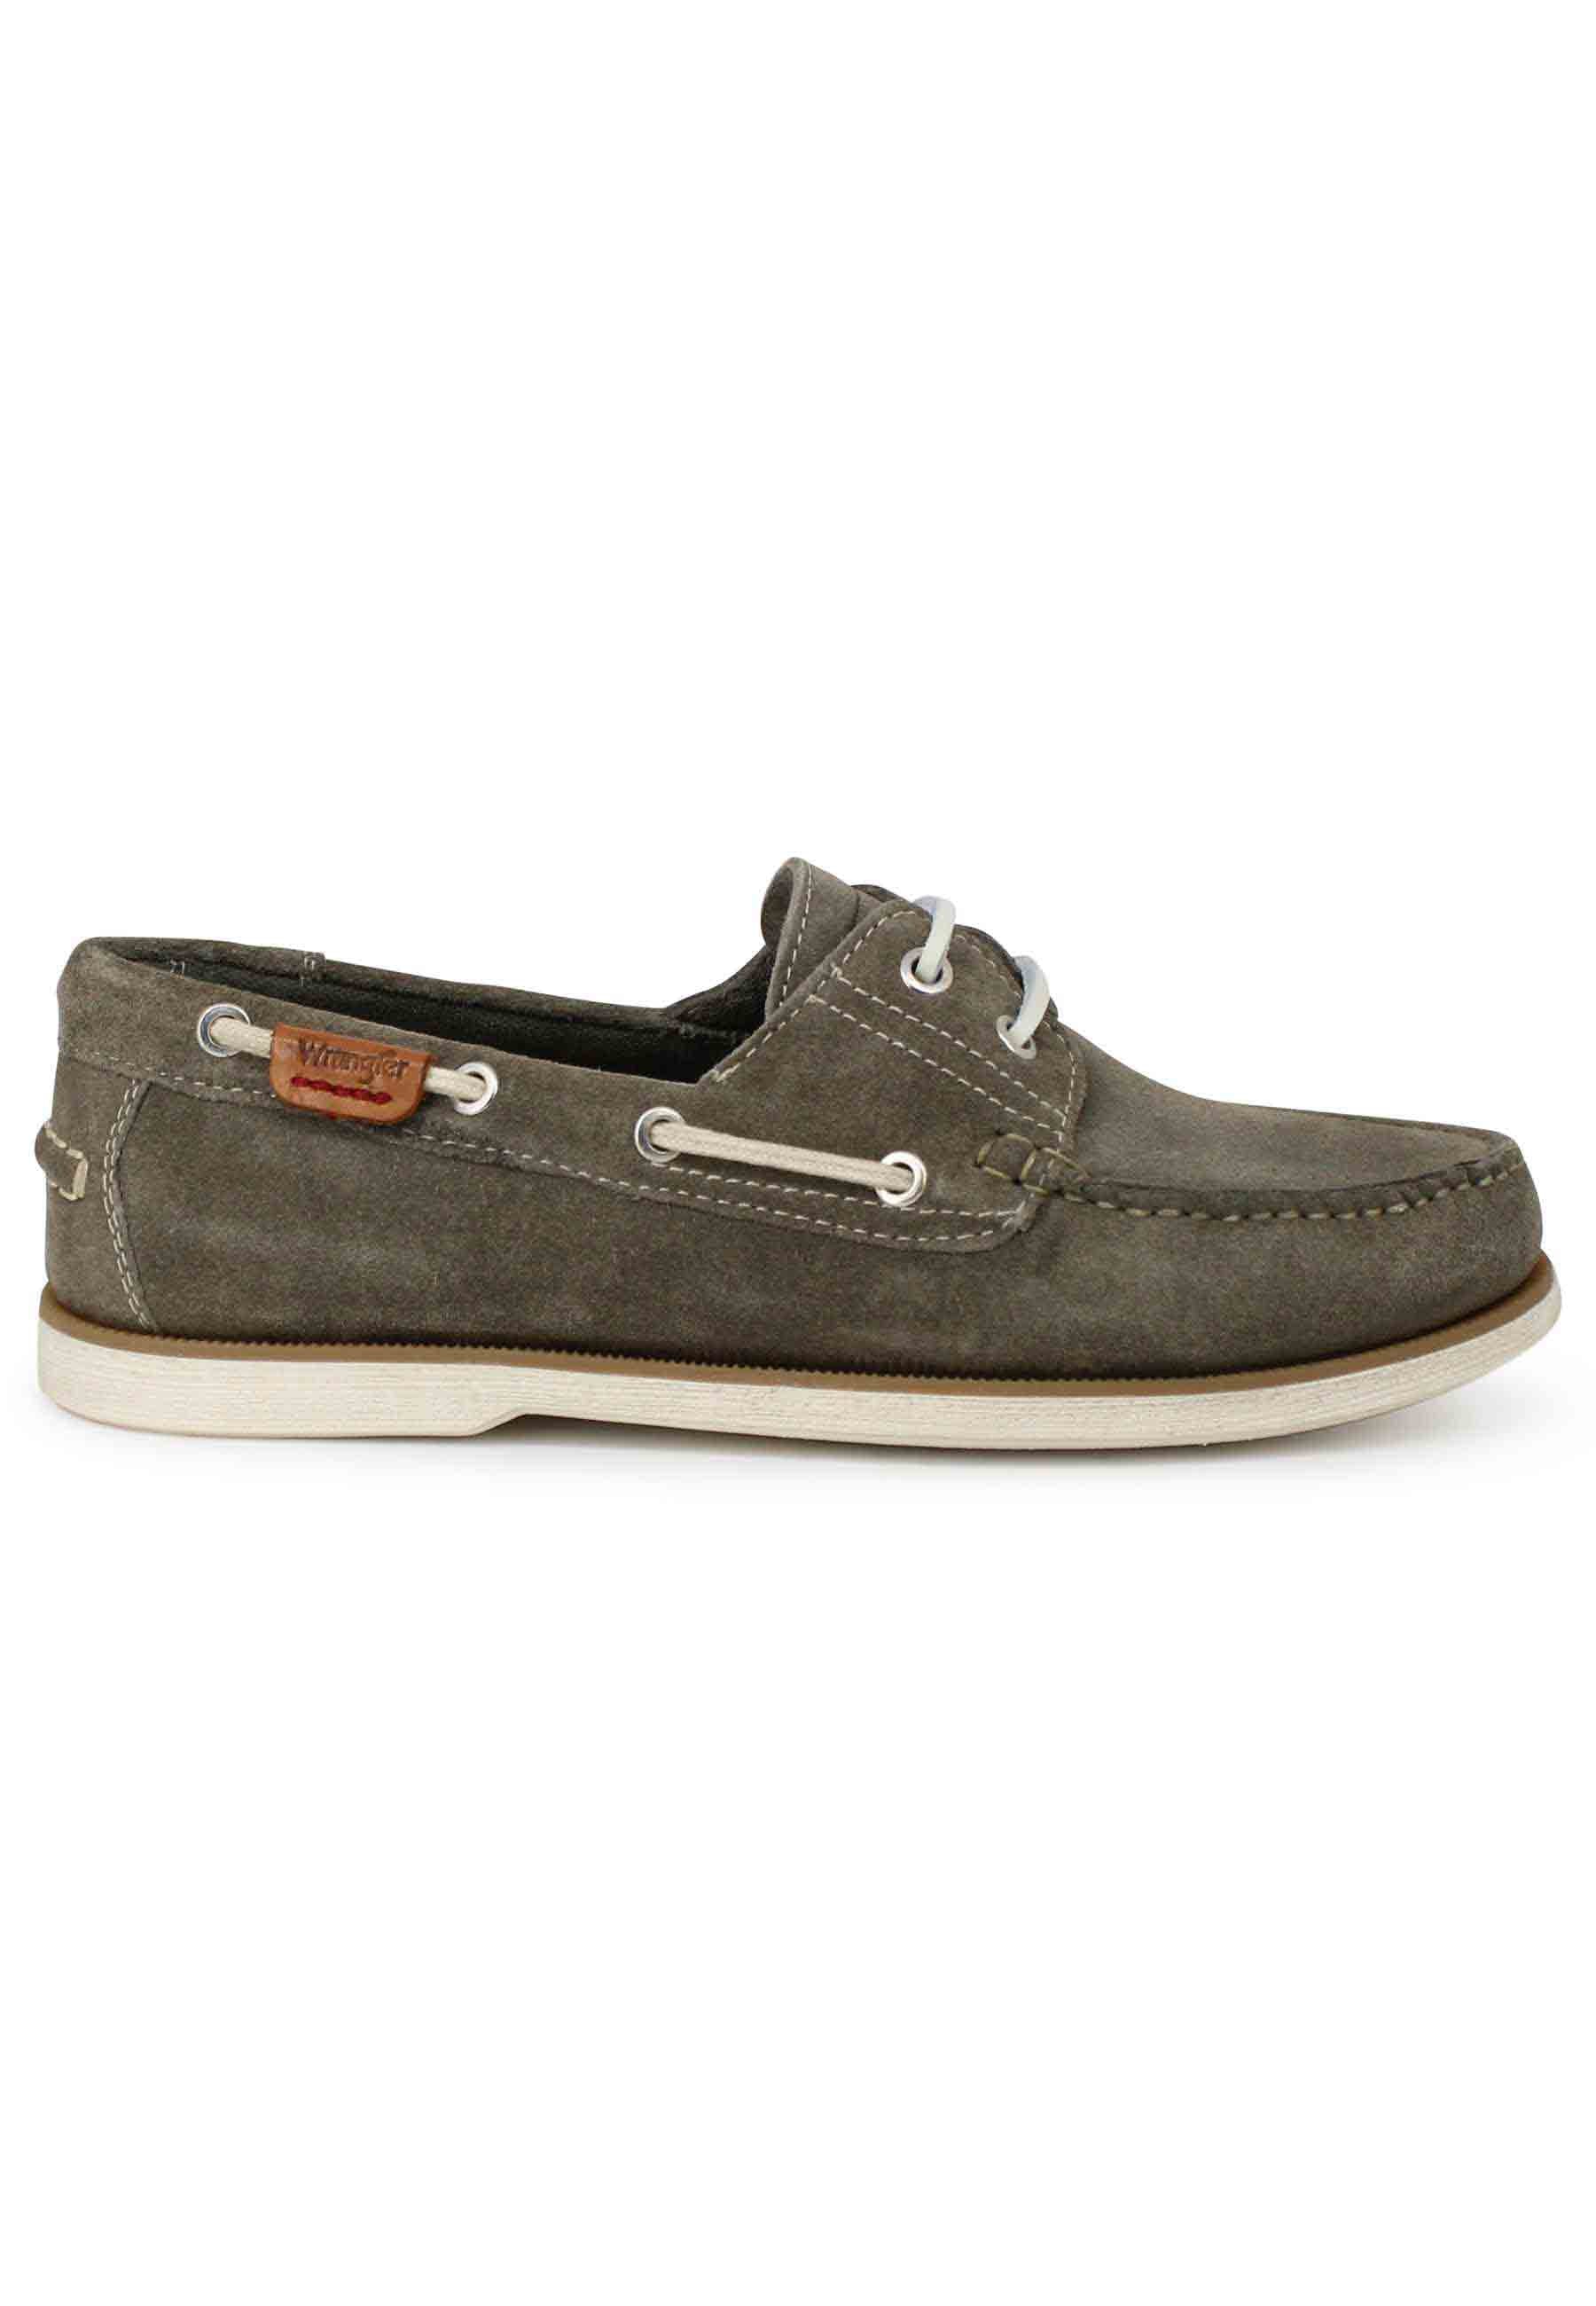 Baltic men's lace-ups in mud suede with leather laces and rubber sole